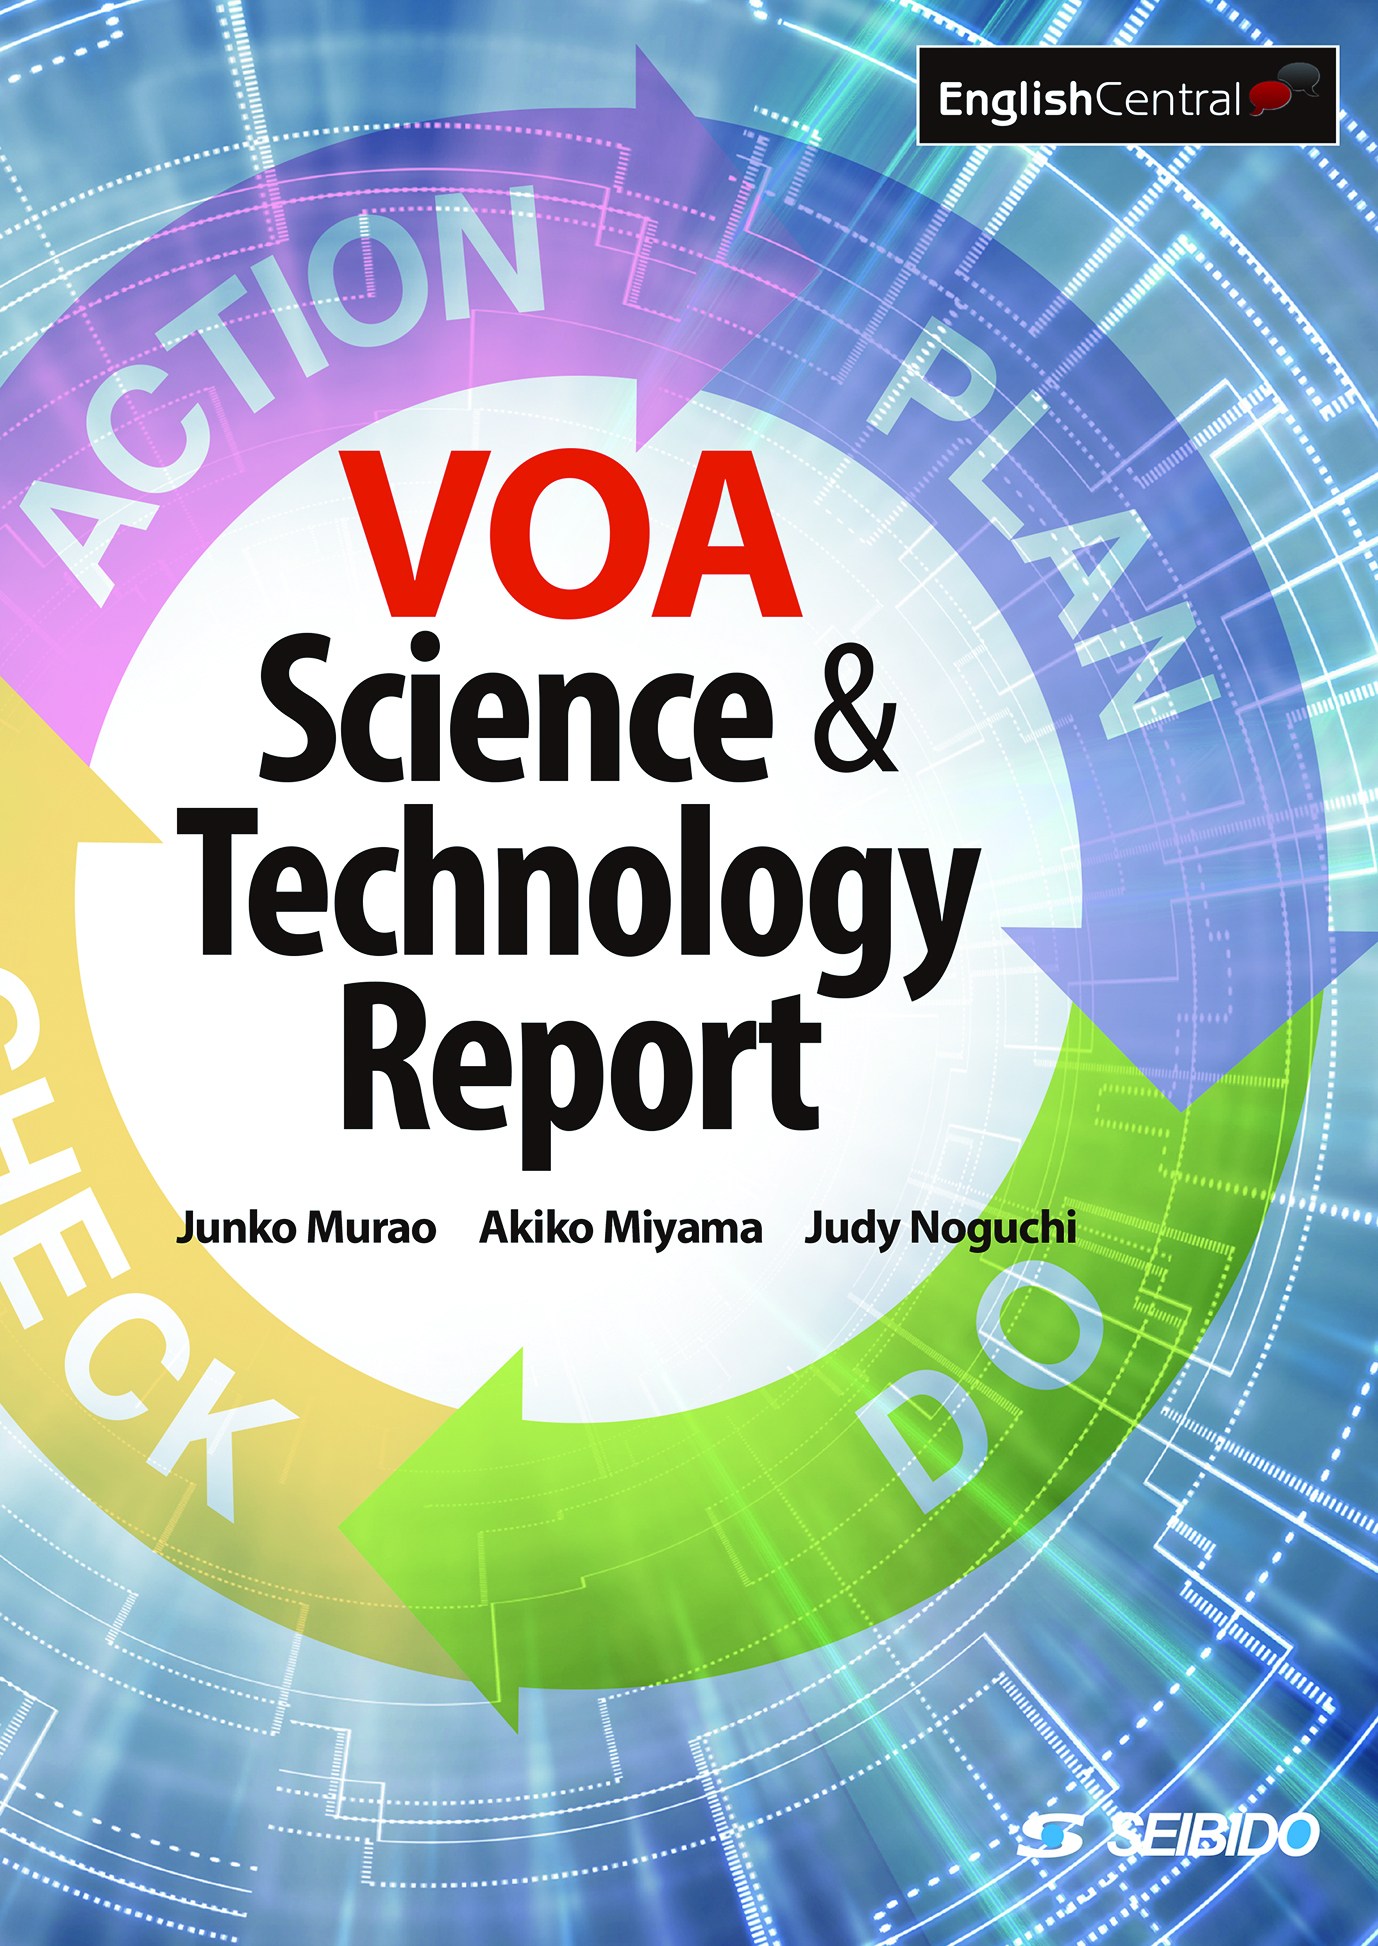 VOA Science & Technology Report　/　VOAで学ぶ最先端技術とPBL基礎演習の商品画像